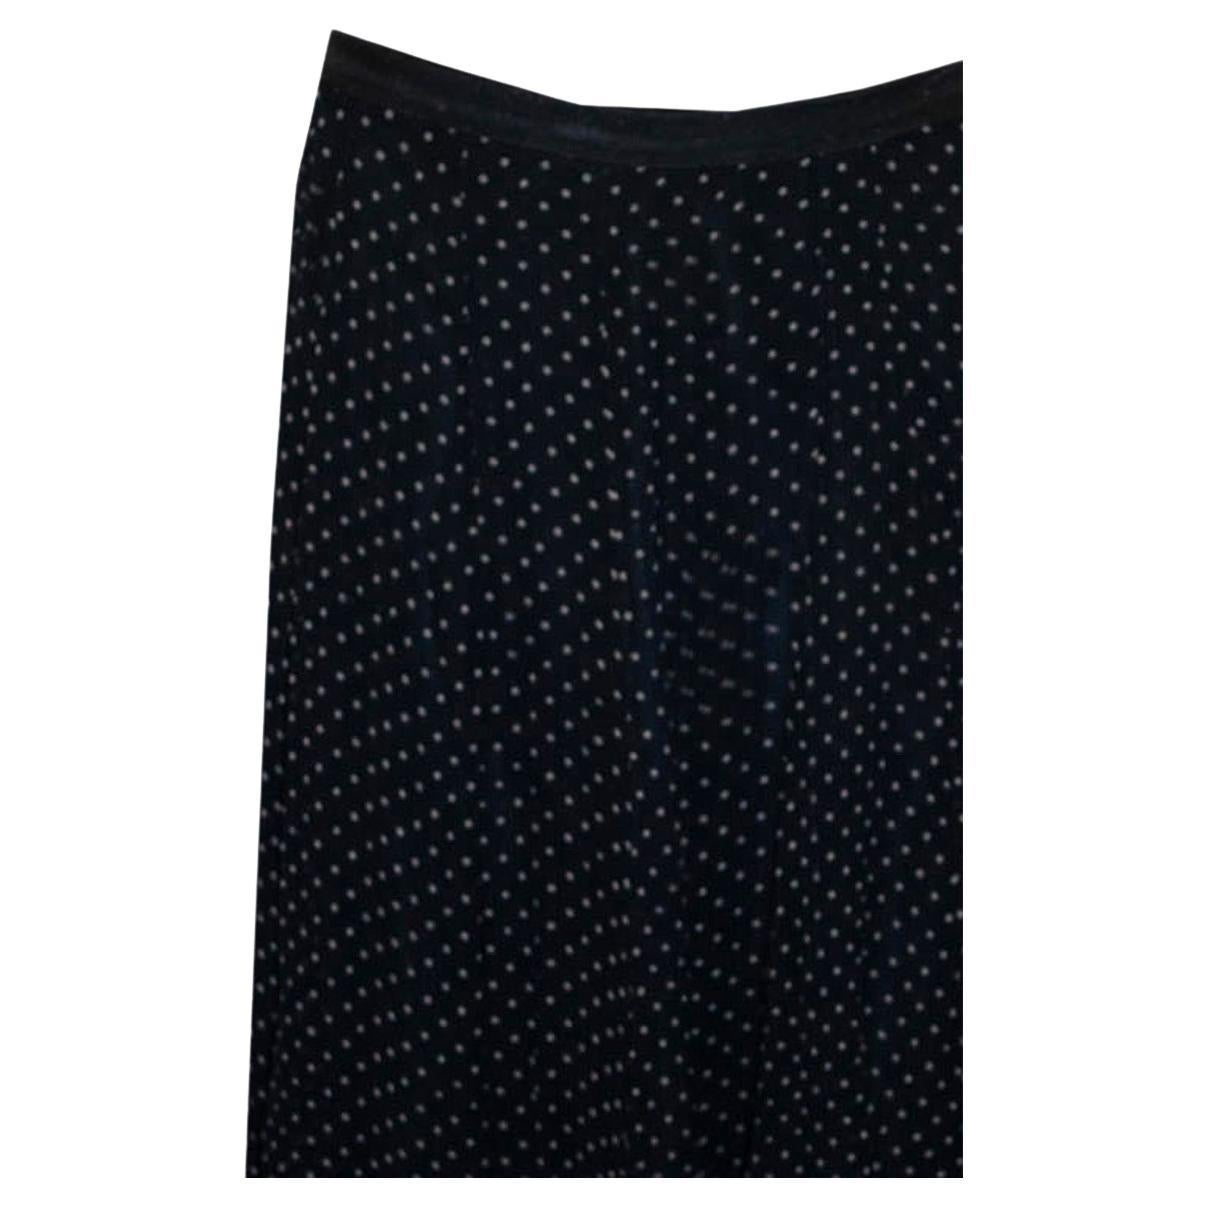 A great skirt for Spring /Summer by Nicole Farhi. In a blue silk with white spots and great tailoring, the skirt hangs beautifully. 
it has a side zip opening and is fully lined.
Measurements: waist 29'', length 26''